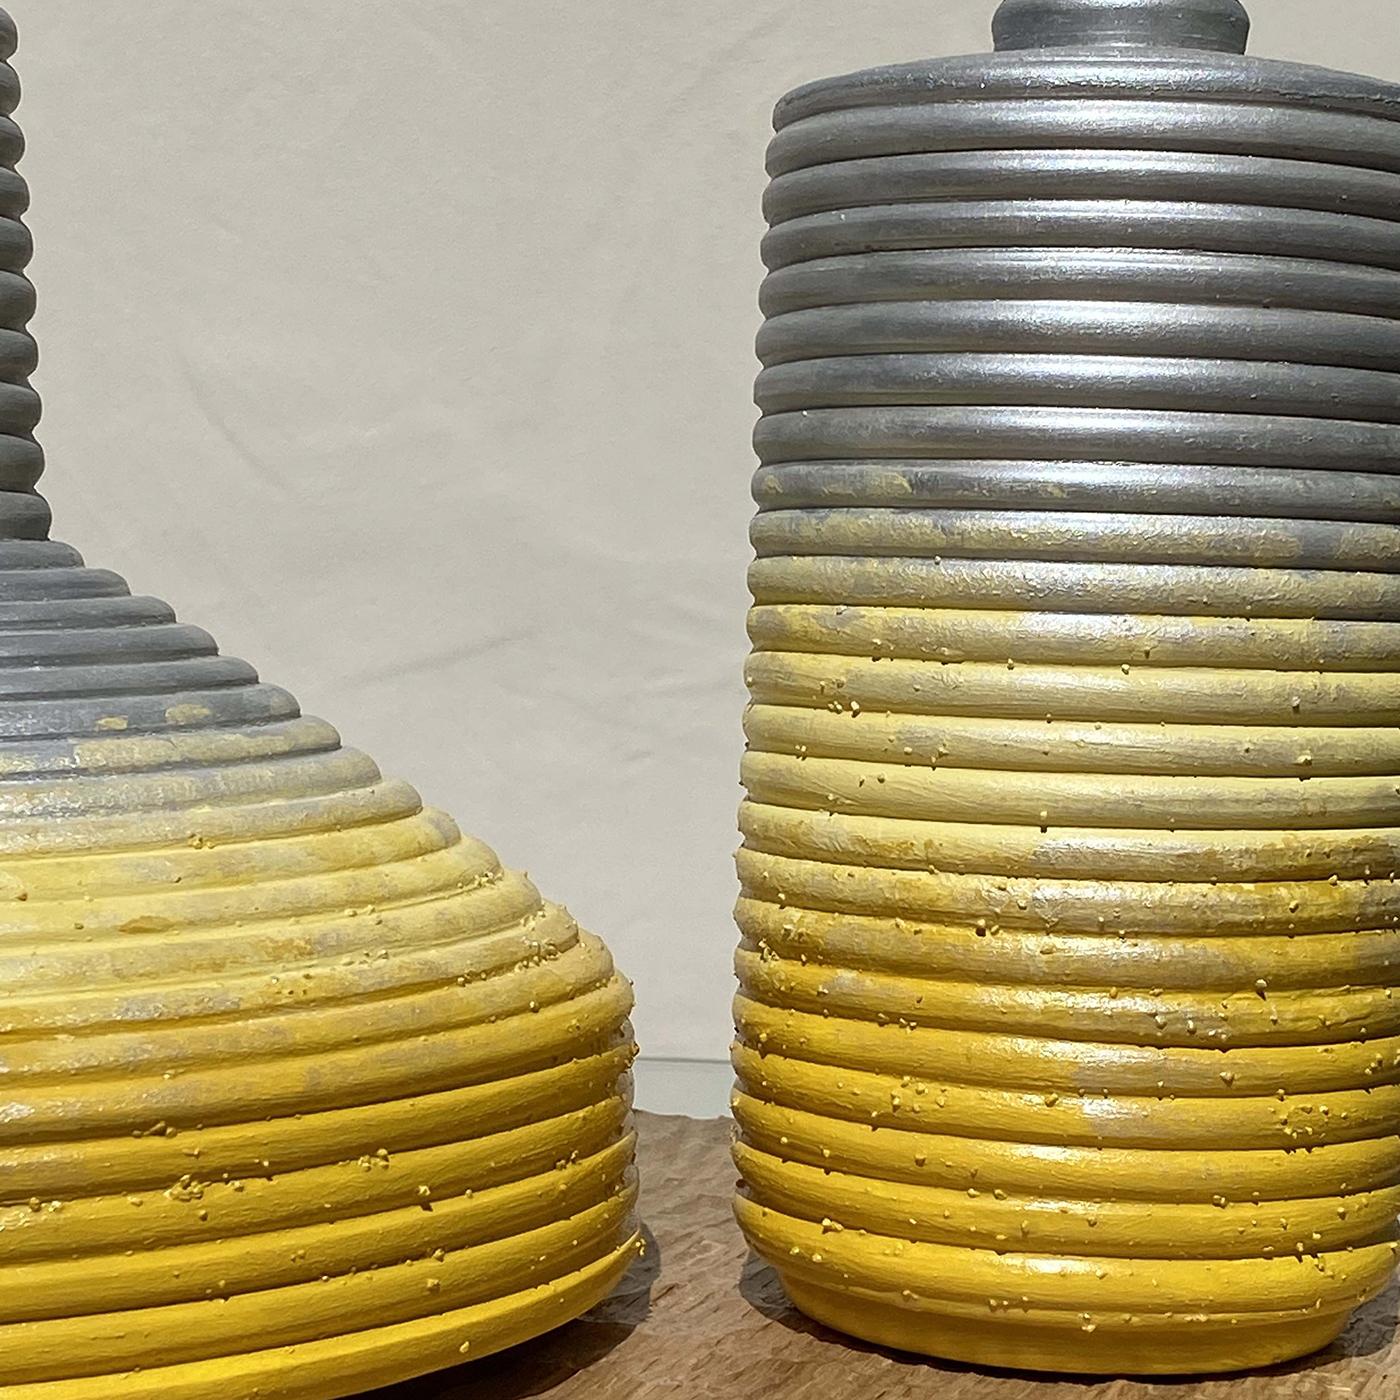 The Calafuria Tre 2 vases by Mascia Meccani makes a rustic addition to the home. The two hand-turned biscuit terracotta vases are characterized by an unusual ribbed texture, hand-painted in yellow and silver with a decorative gradated effect. Set on